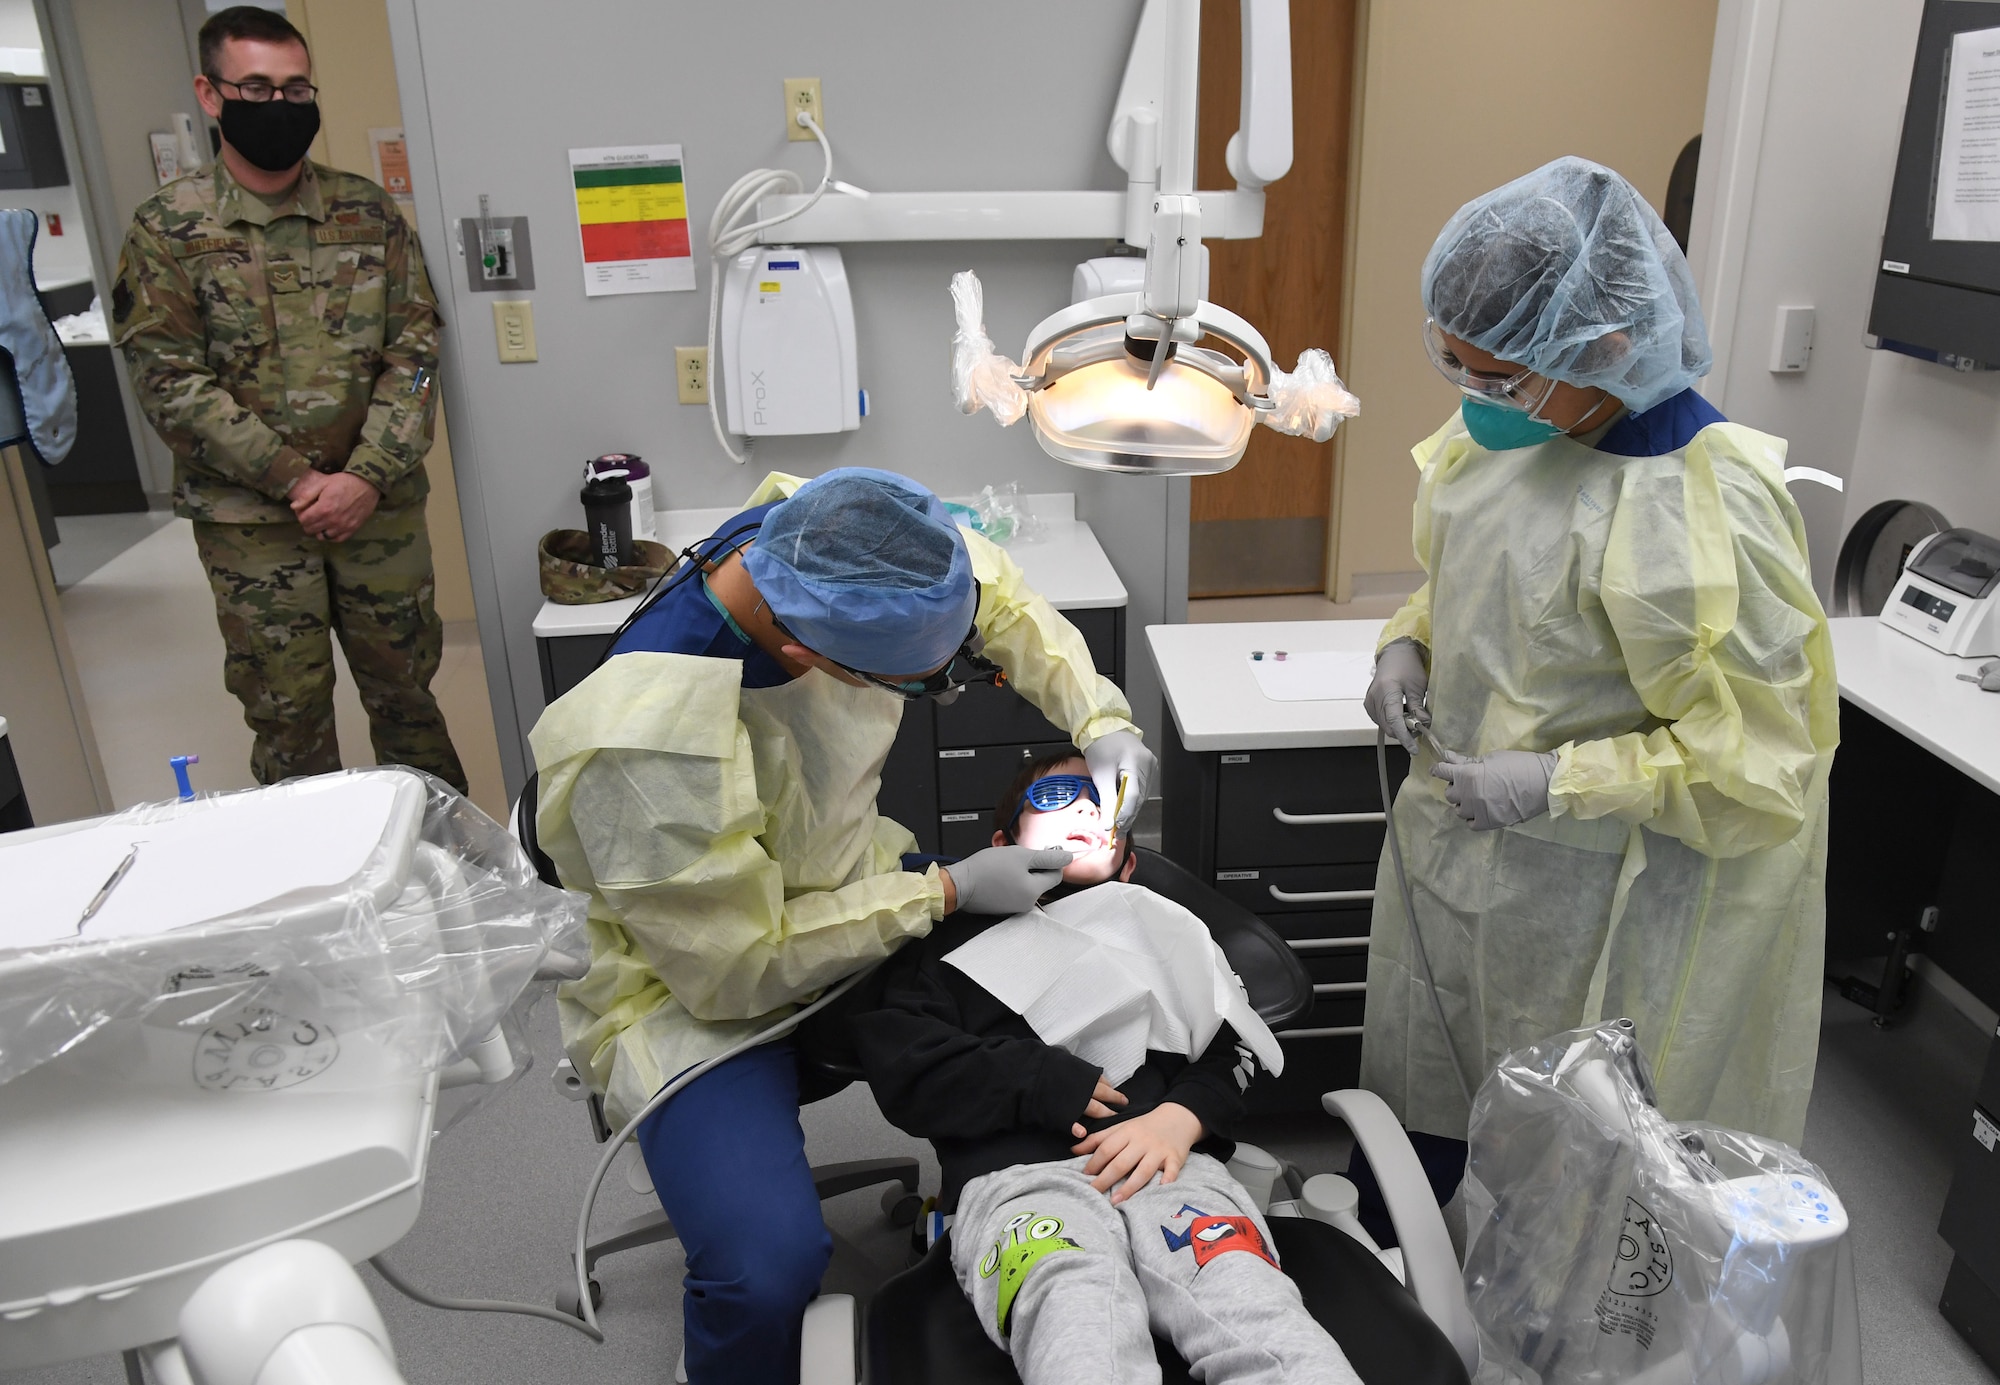 Members of the 81st Dental Squadron conduct a dental exam on a patient during the 10th Annual Give Kids a Smile Day at the dental clinic inside the Keesler Medical Center at Keesler Air Force Base, Mississippi, Feb. 17, 2021. The event was held in recognition of National Children's Dental Health Month and included free dental exams and cleanings for children ages 1-12. (U.S. Air Force photo by Kemberly Groue)